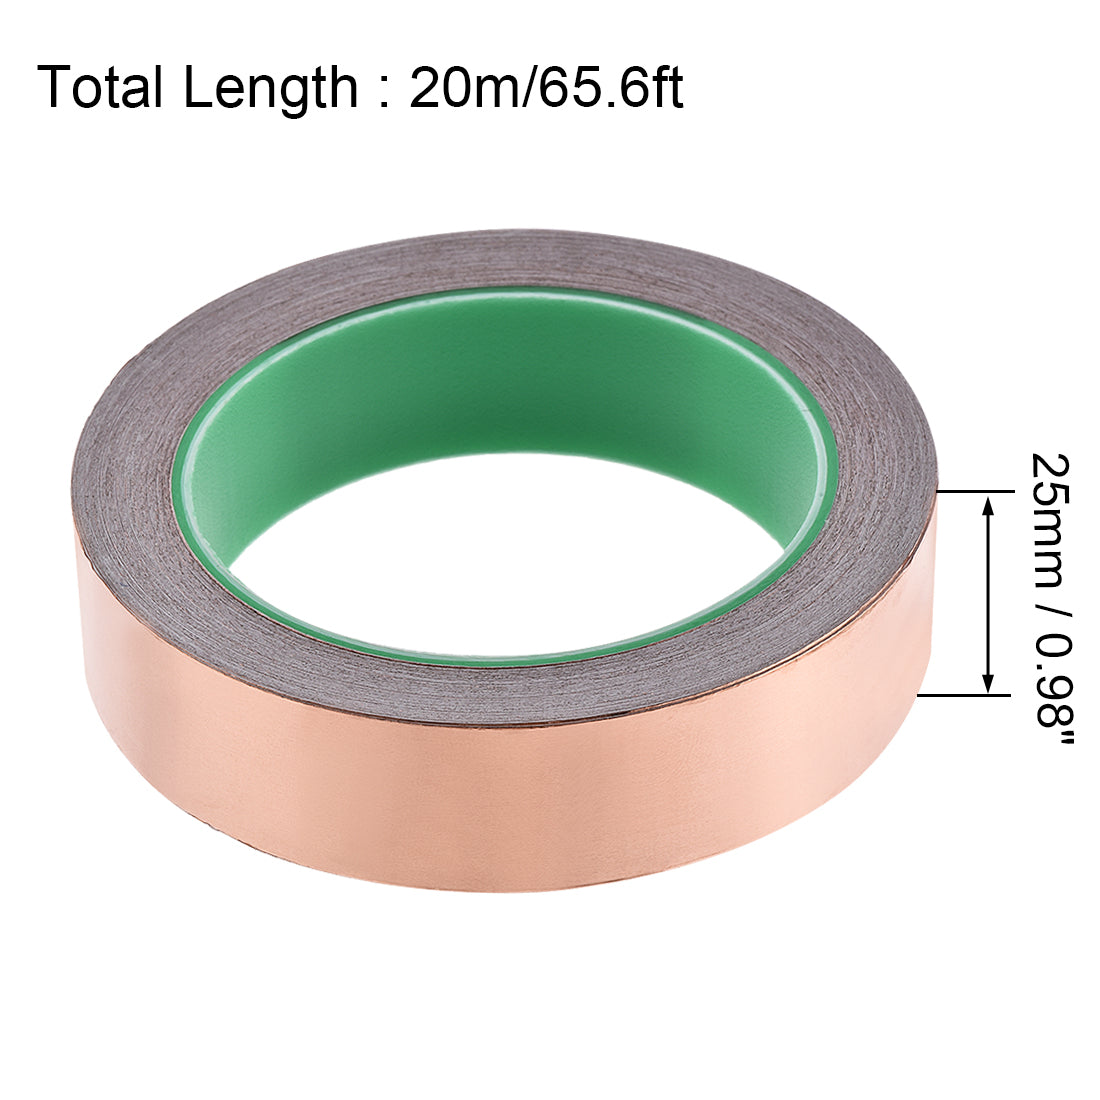 uxcell Uxcell Double Sided Conductive Tape Copper Foil Tape 25mm x 20m for EMI Shielding